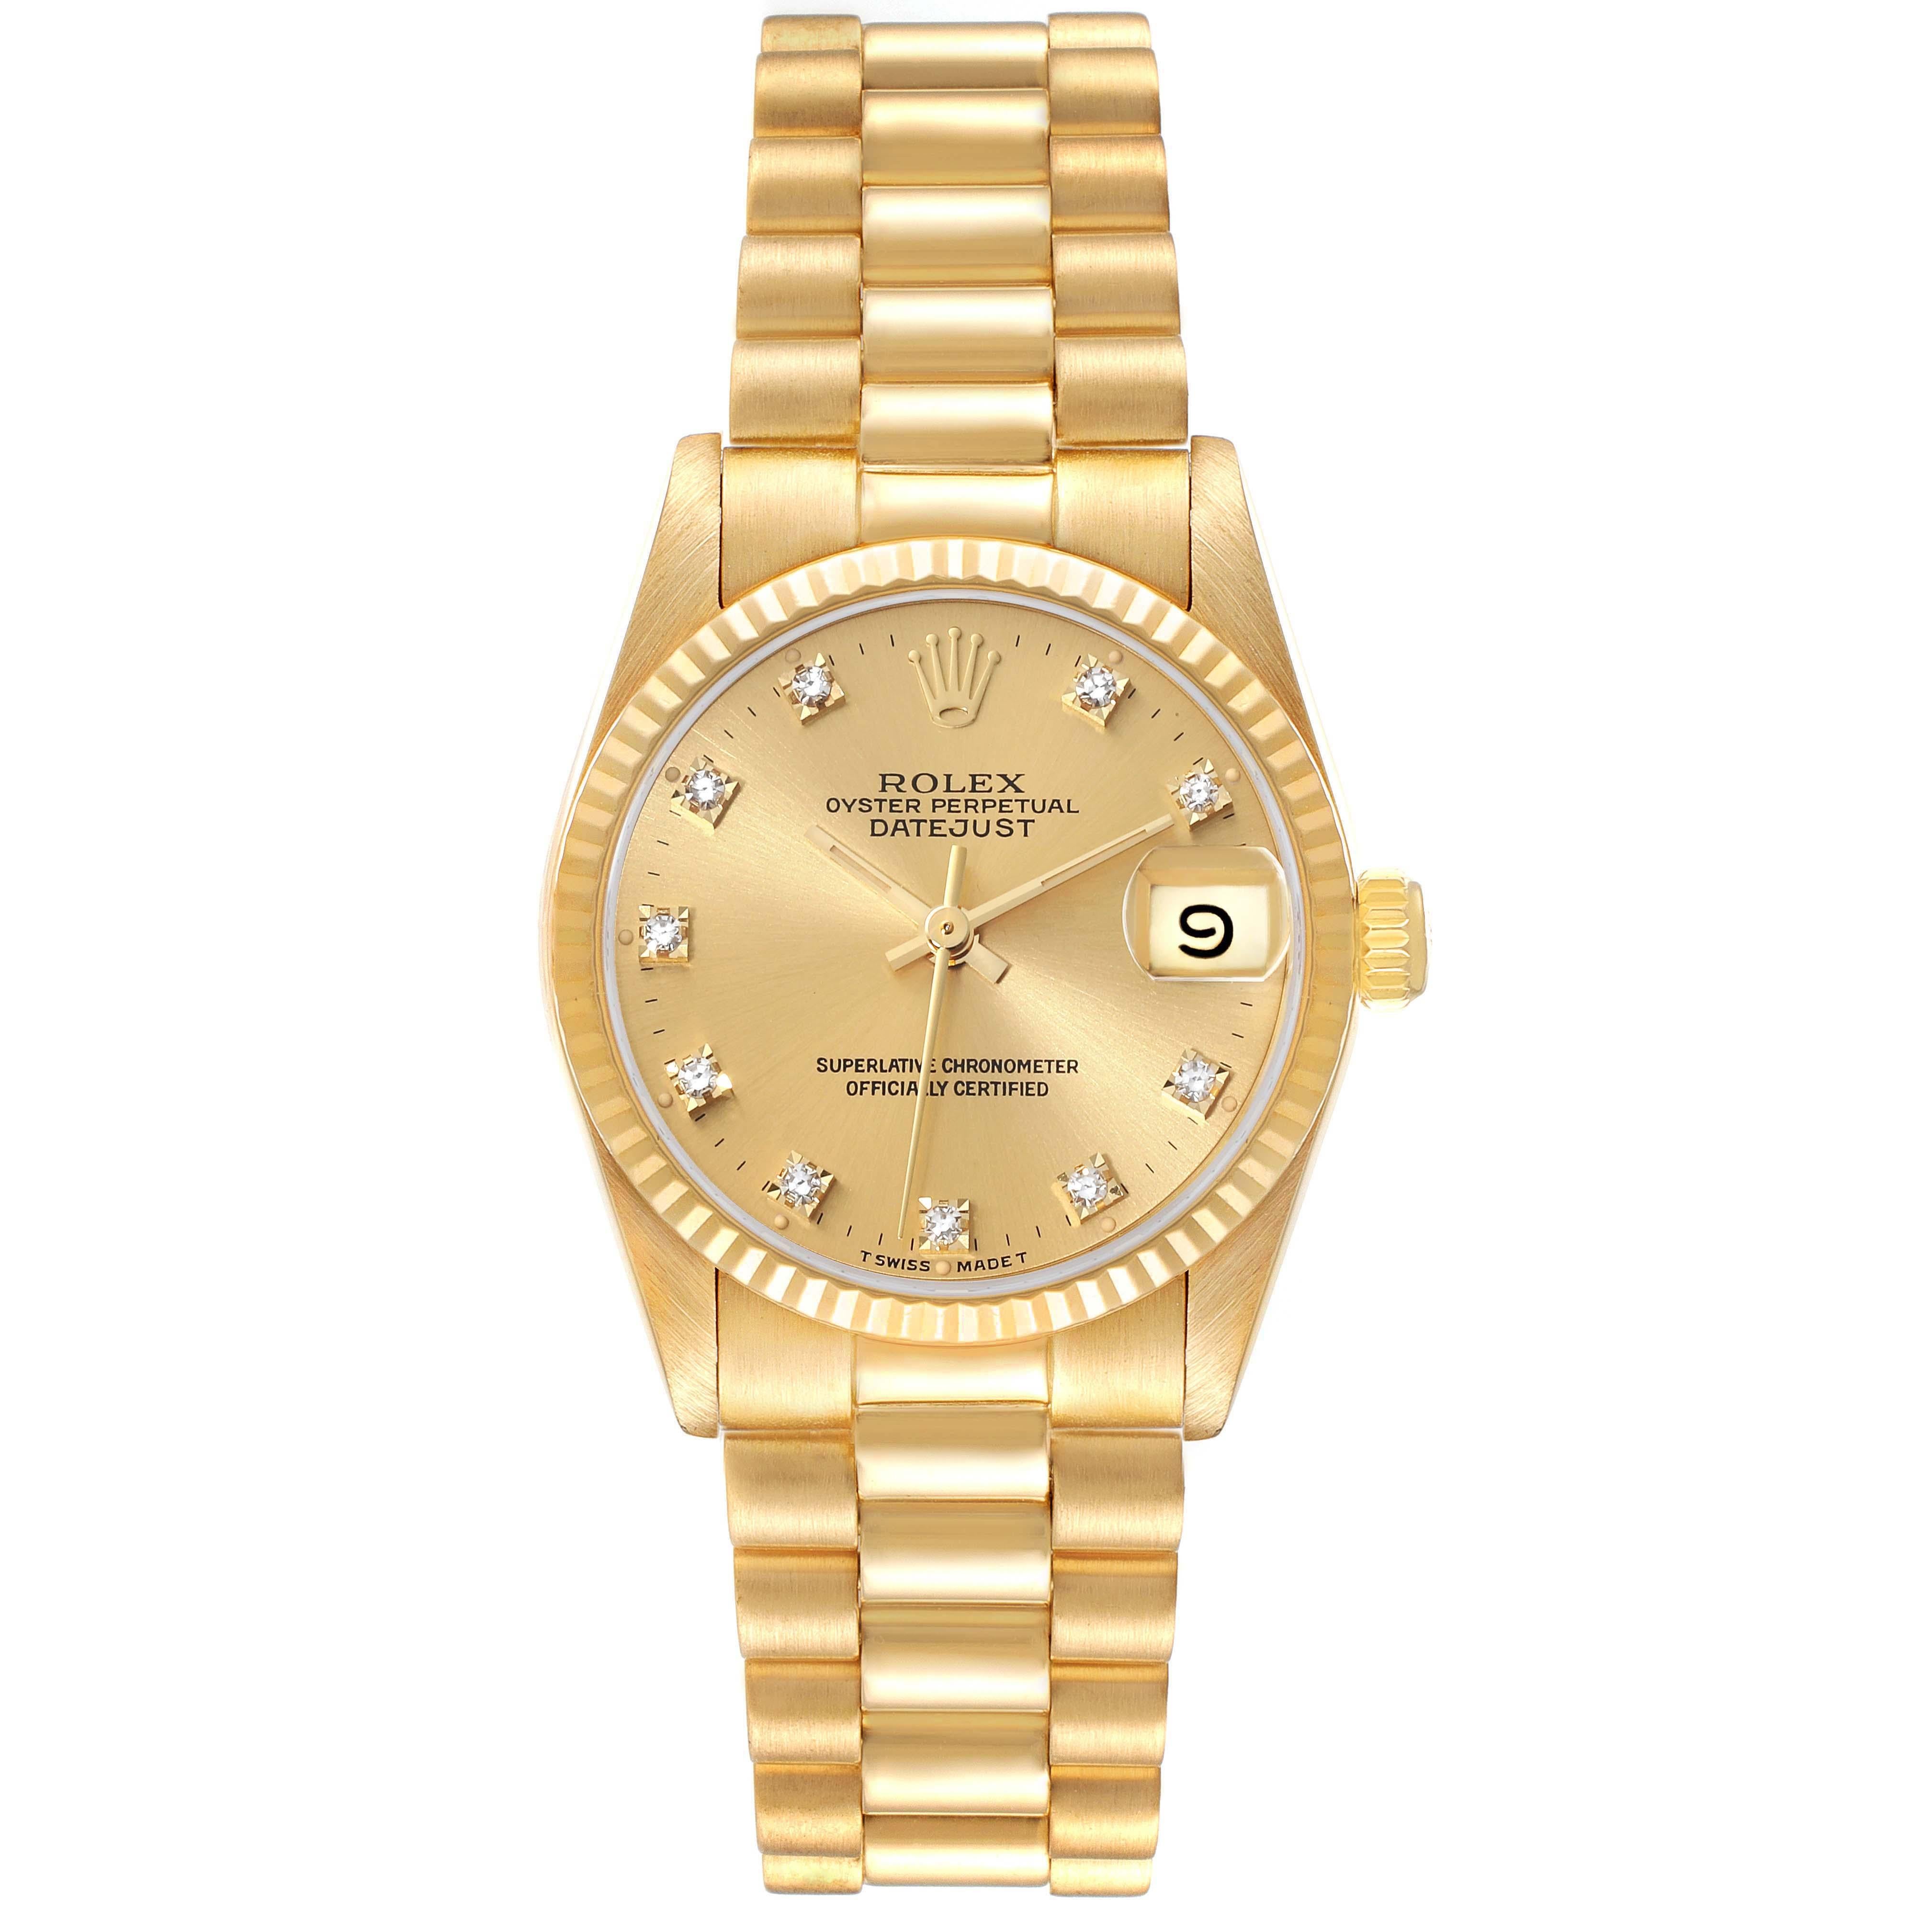 Rolex President Midsize Yellow Gold Diamond Dial Ladies Watch 68278. Officially certified chronometer automatic self-winding movement. 18k yellow gold oyster case 31.0 mm in diameter. Rolex logo on the crown. 18k yellow gold fluted bezel.